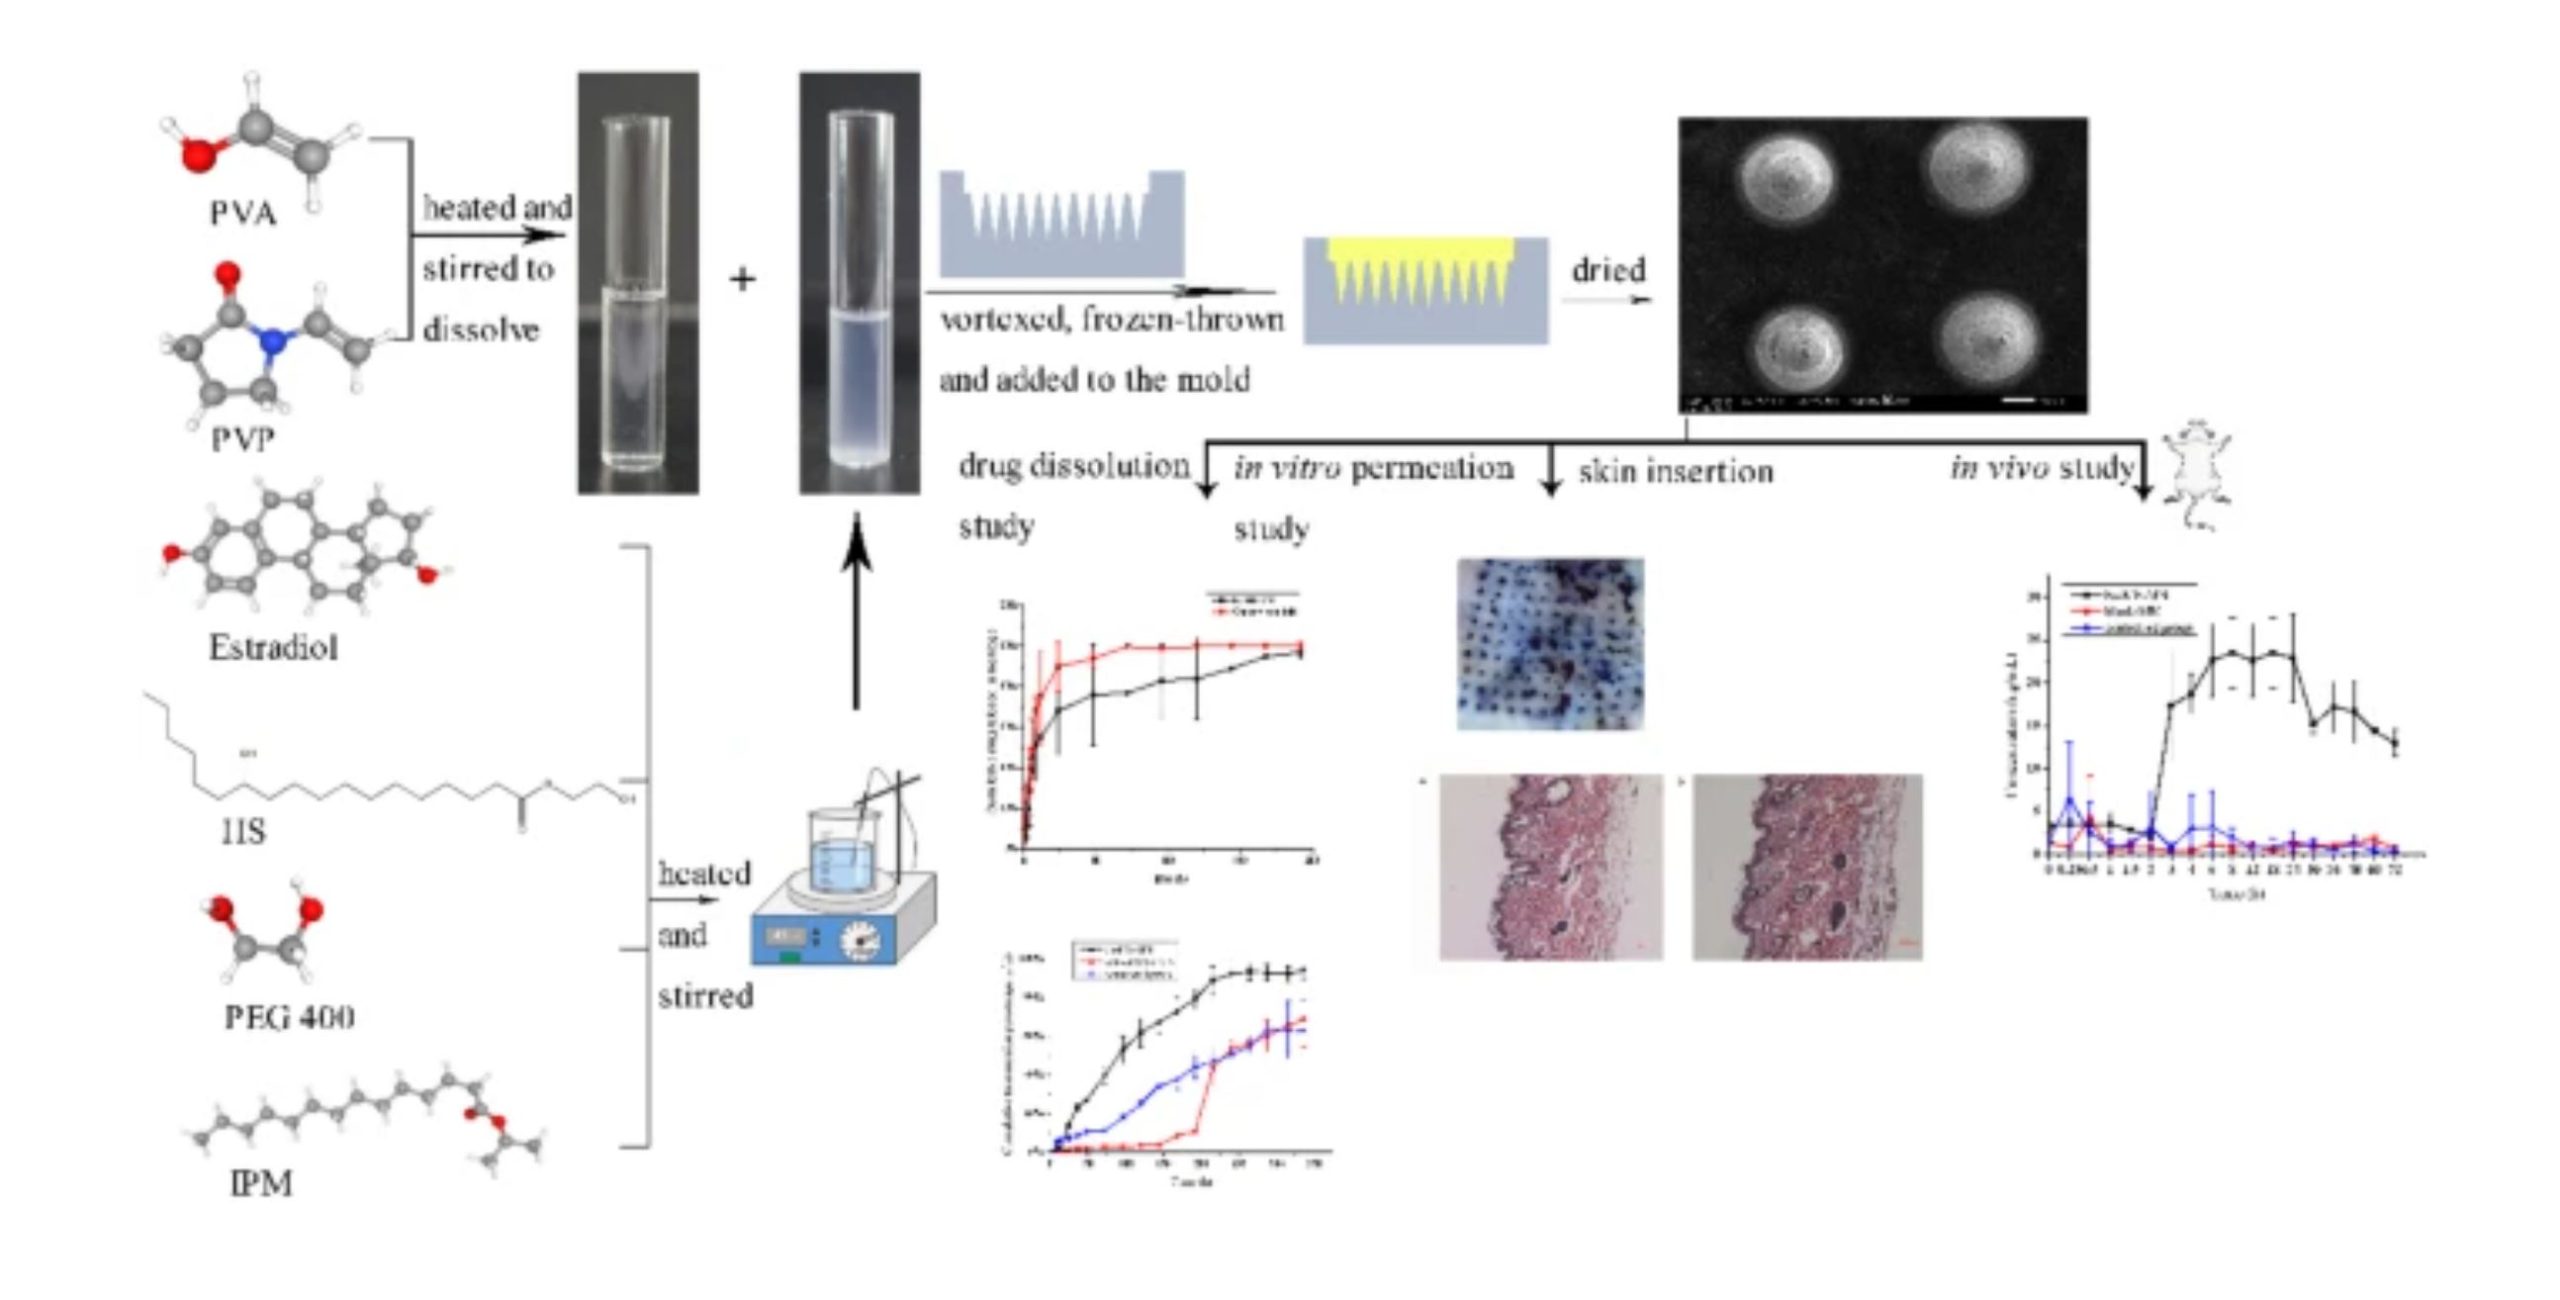 Design, optimization, and evaluation for a long-time-released transdermal microneedle delivery system containing estradiol